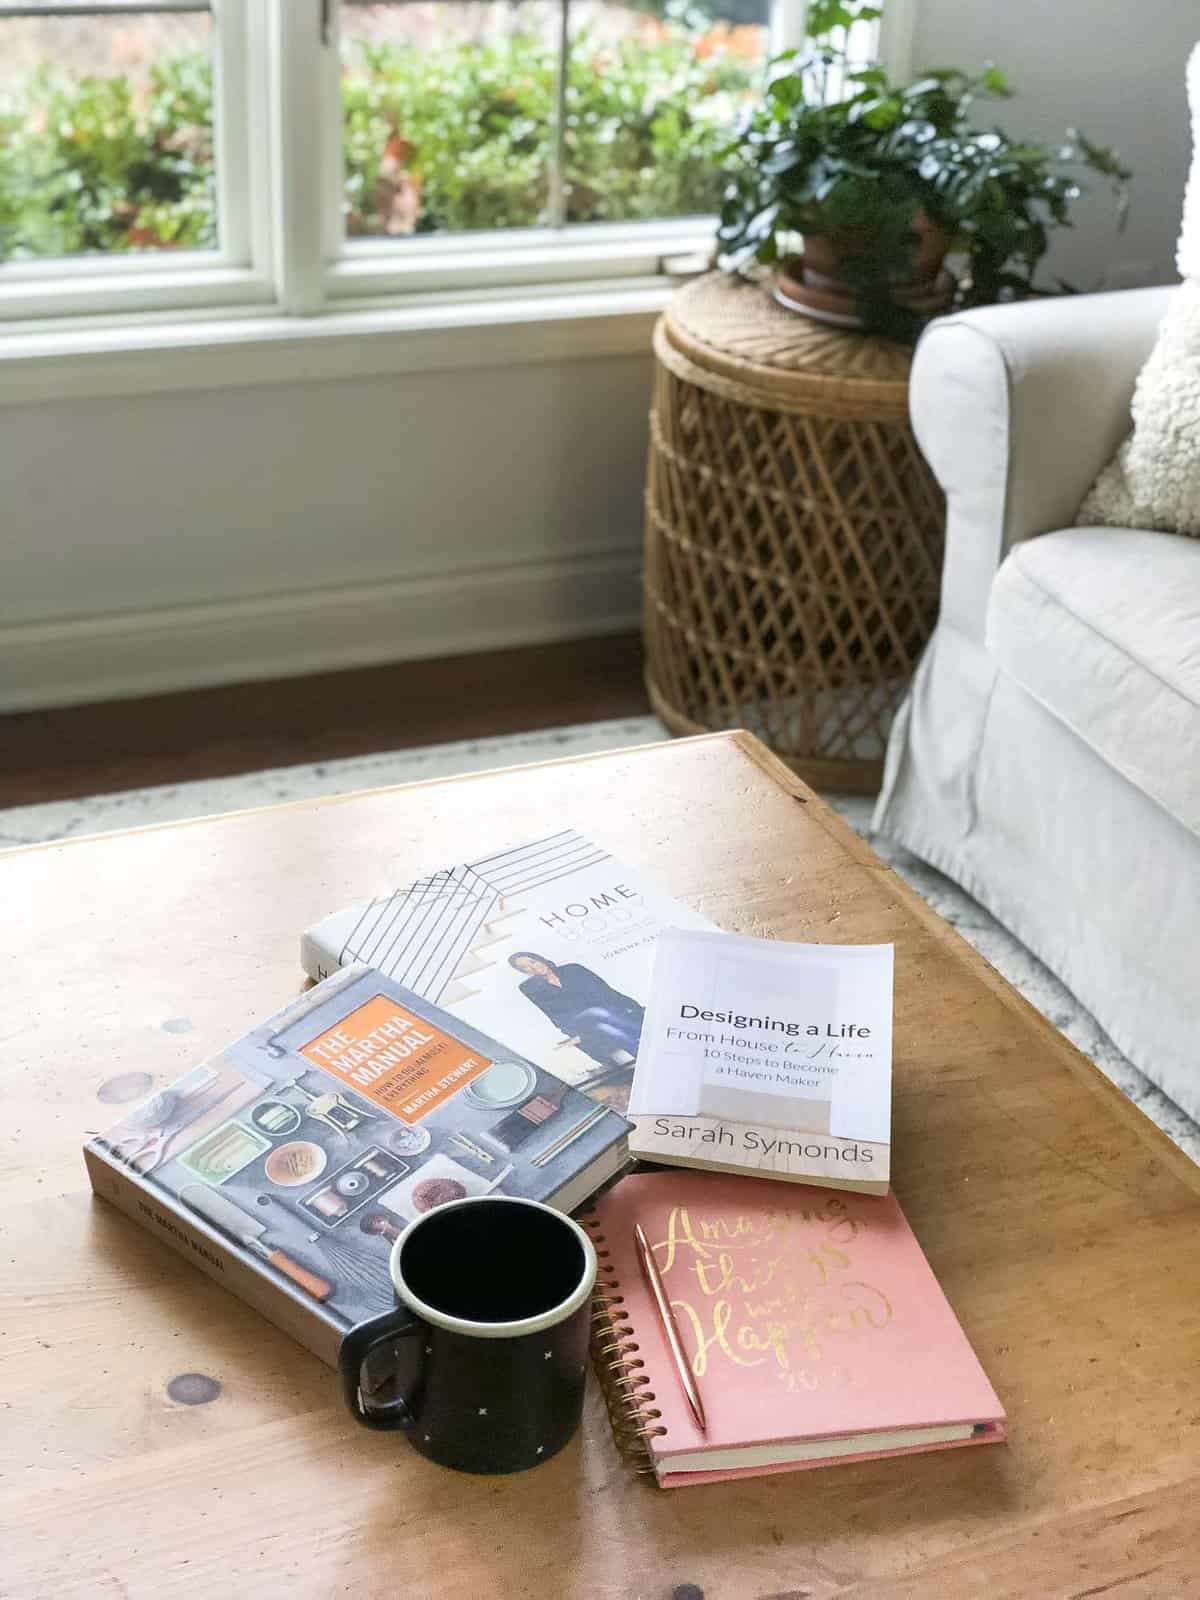 Are you looking for beginner interior design books? Today I'm reviewing 3 interior design books to showcase how each can help in your home design journey. #fromhousetohaven #interiordesign #interiordesignbooks #homedecor